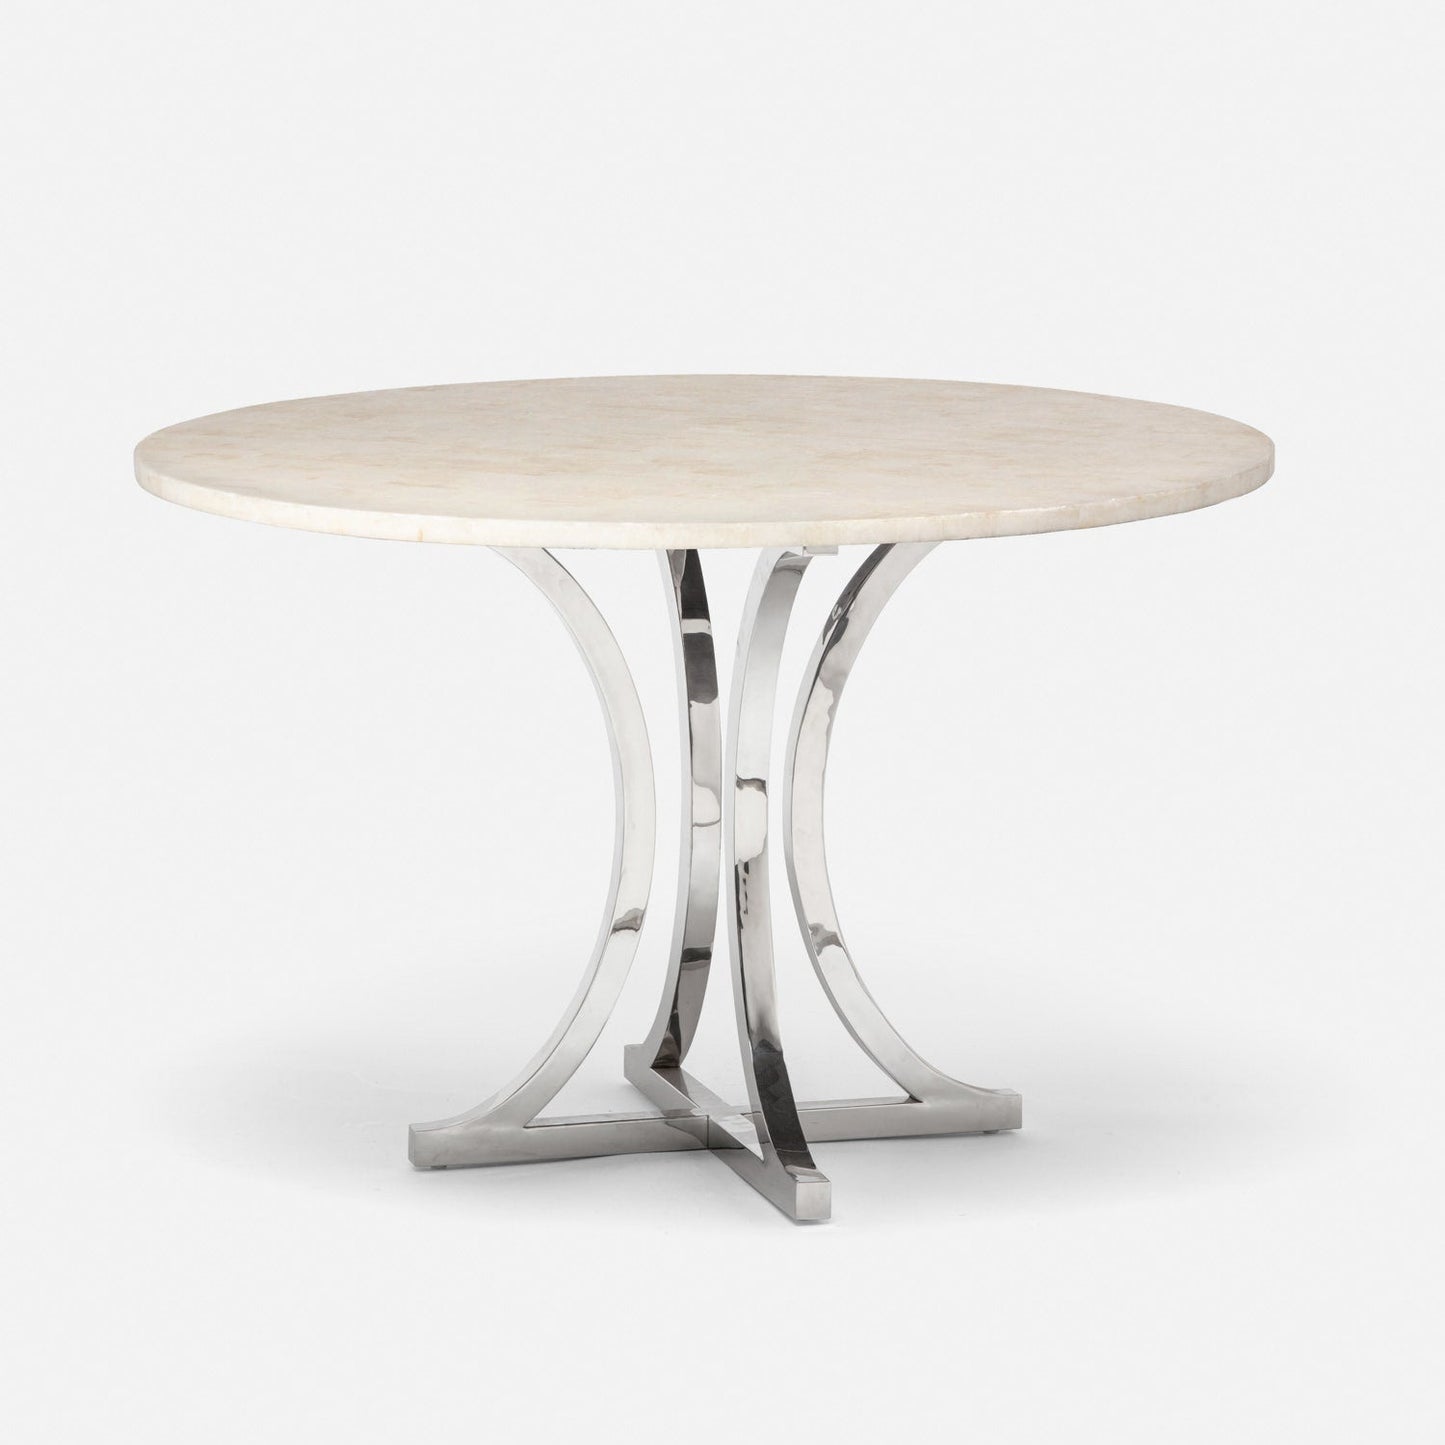 Made Goods Leighton 72" x 30" Polished Silver Steel Dinning Table With Round Ice Crystal Stone Table Top